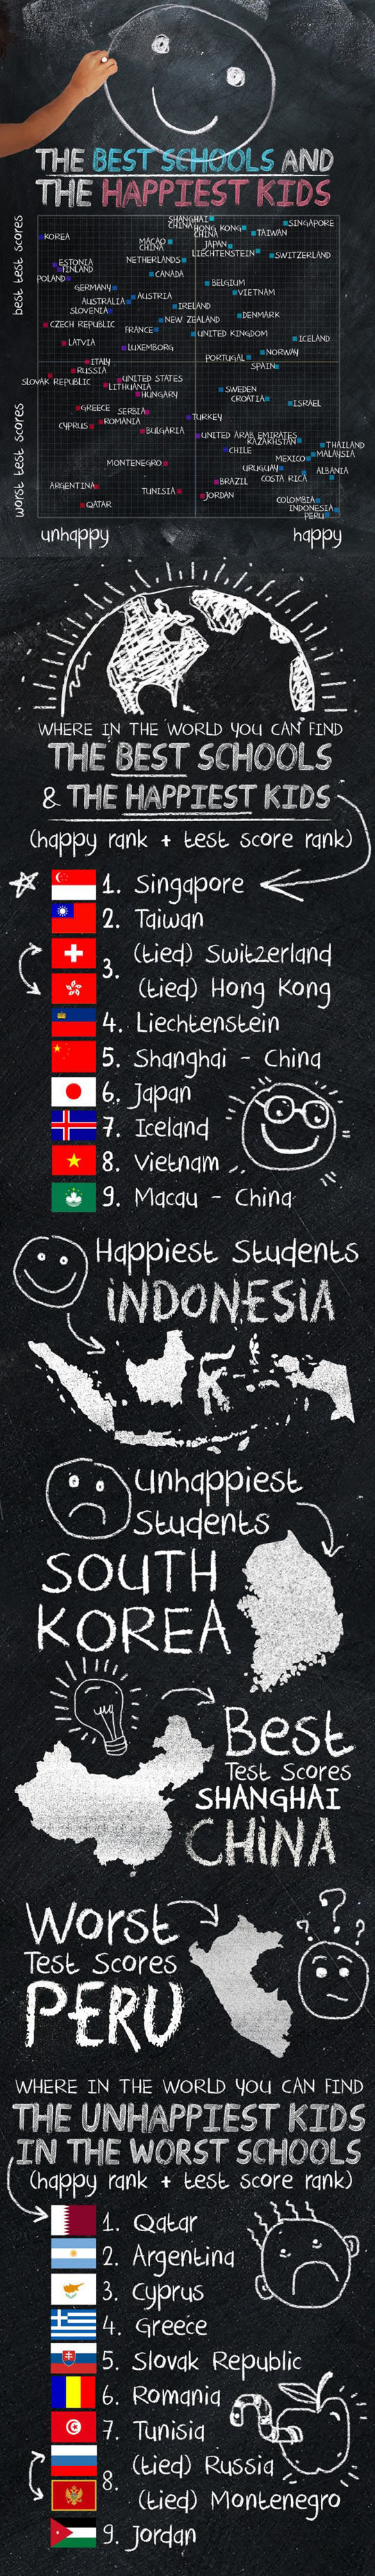 The best schools and the happiest kids.